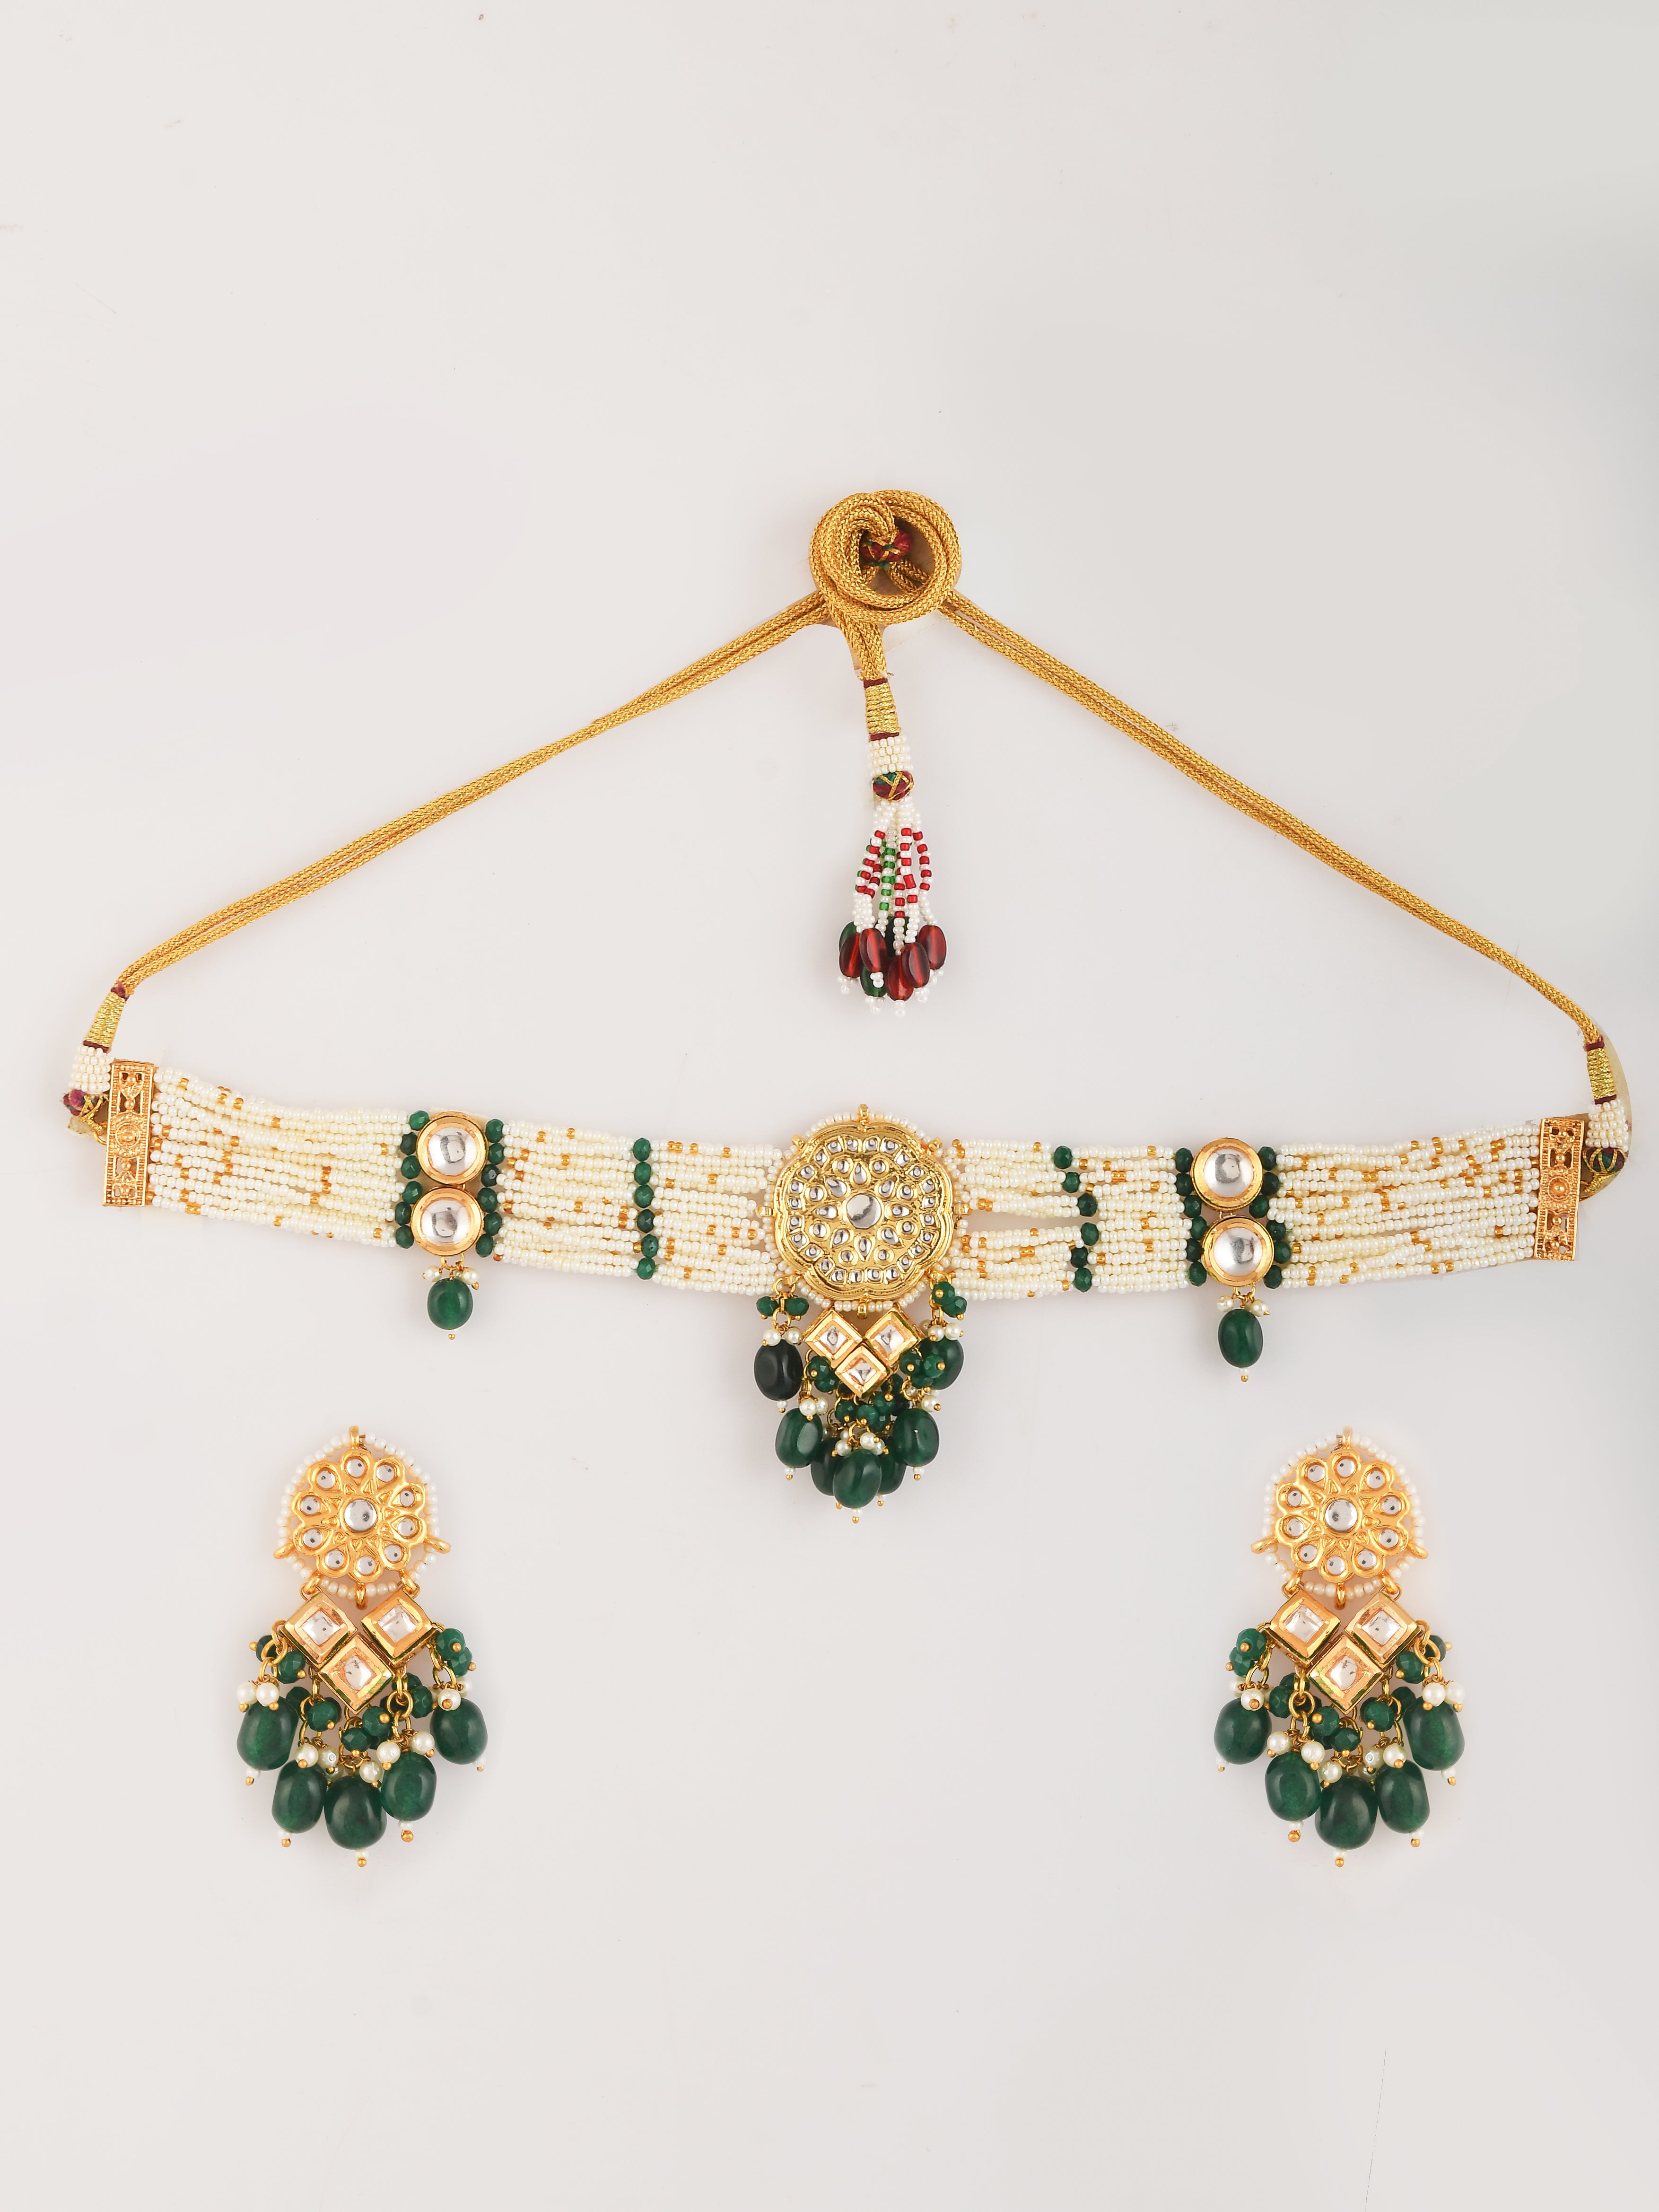 Gold Choker Set | Buy Jewelry to Attend an Indian Wedding